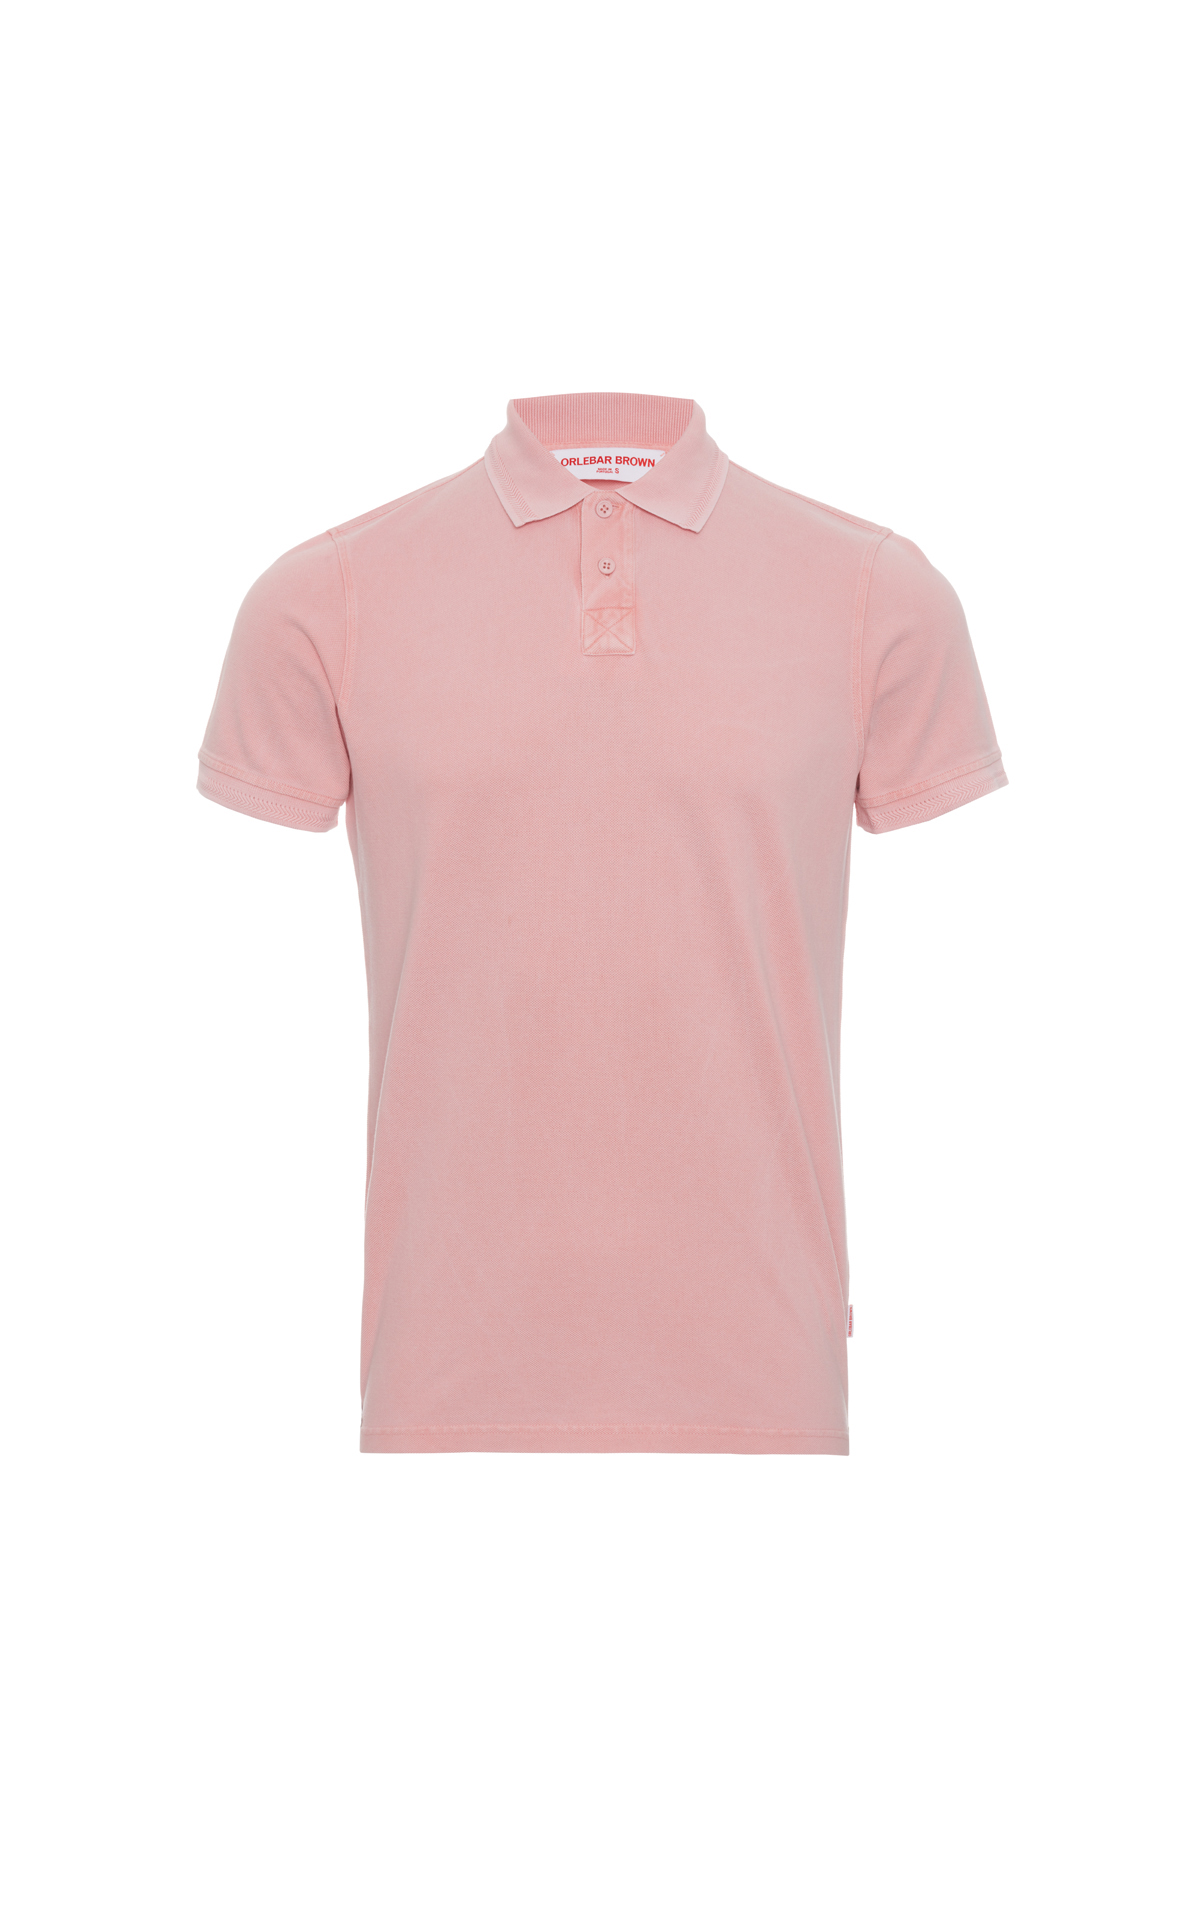 Orlebar Brown Men's jarrett washed polo from Bicester Village